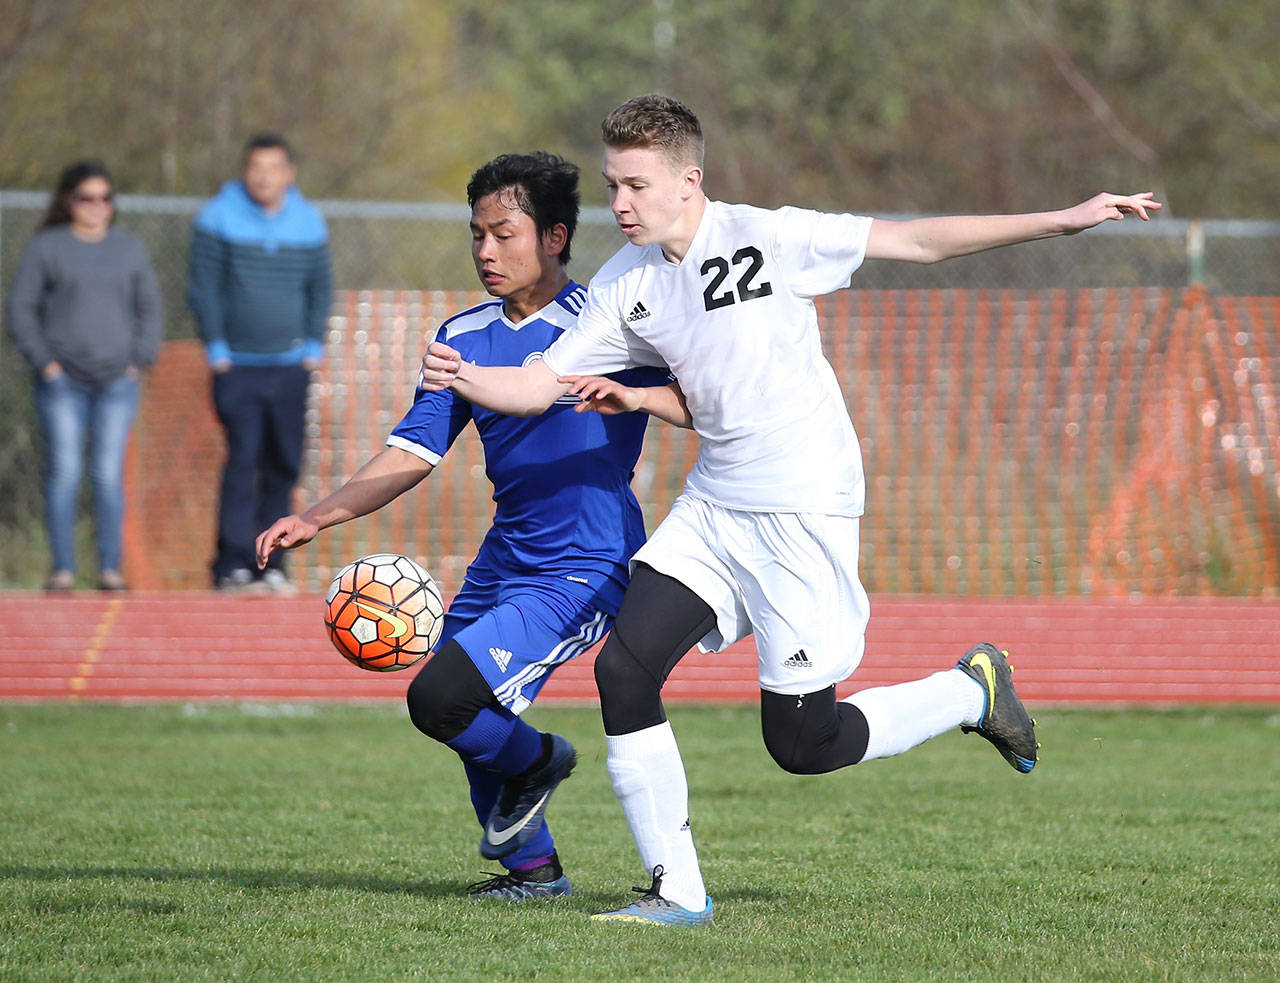 Coupeville’s Ben Smith, right, battles a Chimacum player for possession in Friday’s match.(Photo by John Fisken)